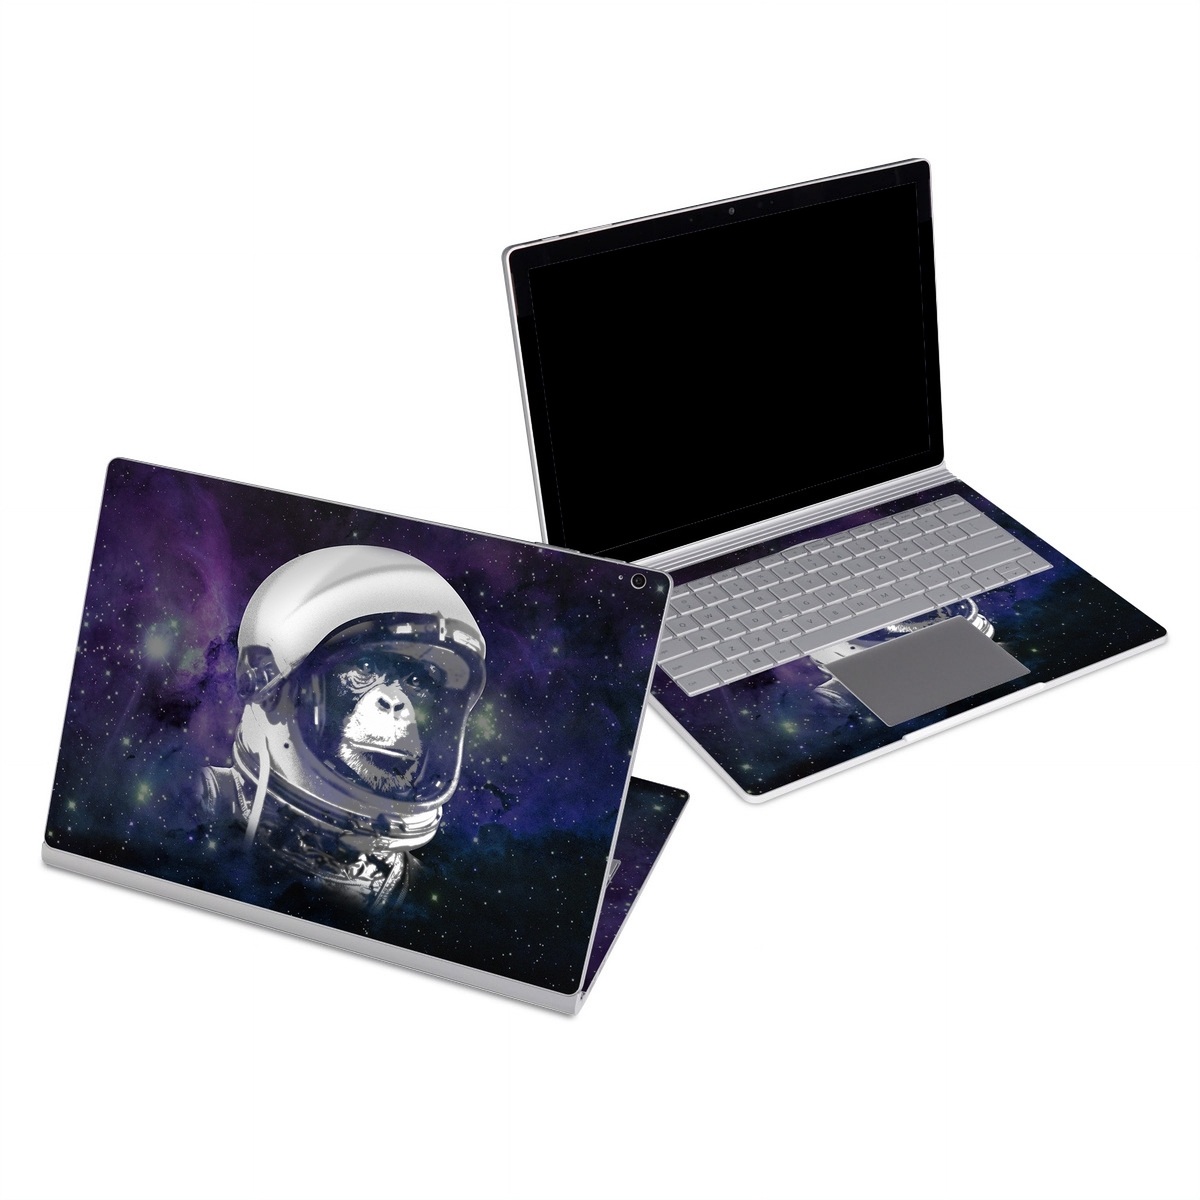 Microsoft Surface Book Series Skin design of Helmet, Astronaut, Personal protective equipment, Illustration, Space, Outer space, Headgear, Fictional character, Sports gear, Football gear, with black, gray, blue, white colors